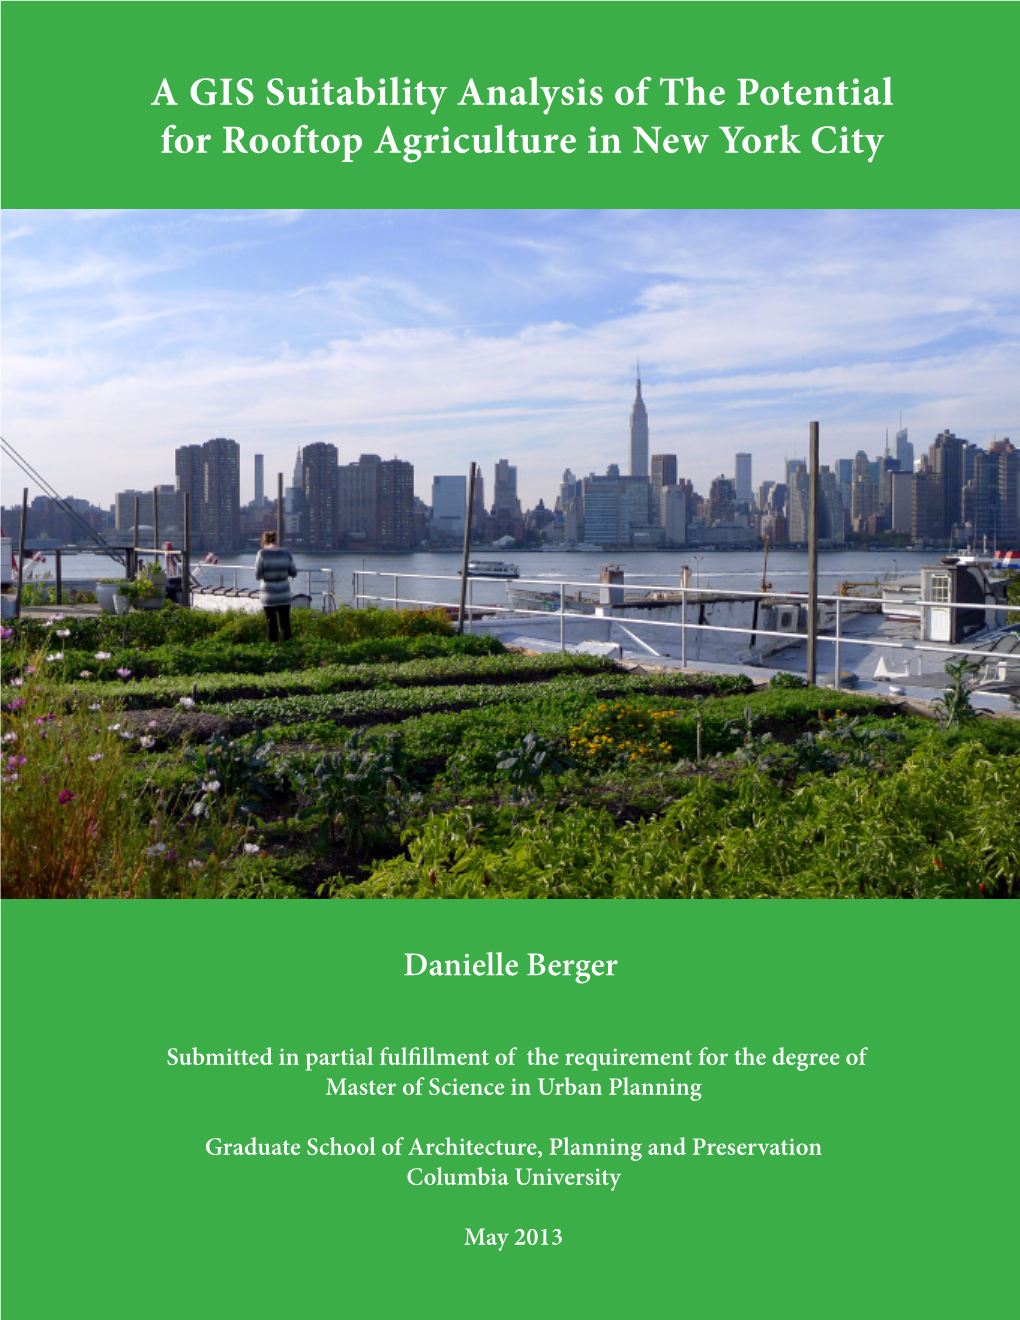 A GIS Suitability Analysis of the Potential for Rooftop Agriculture in New York City